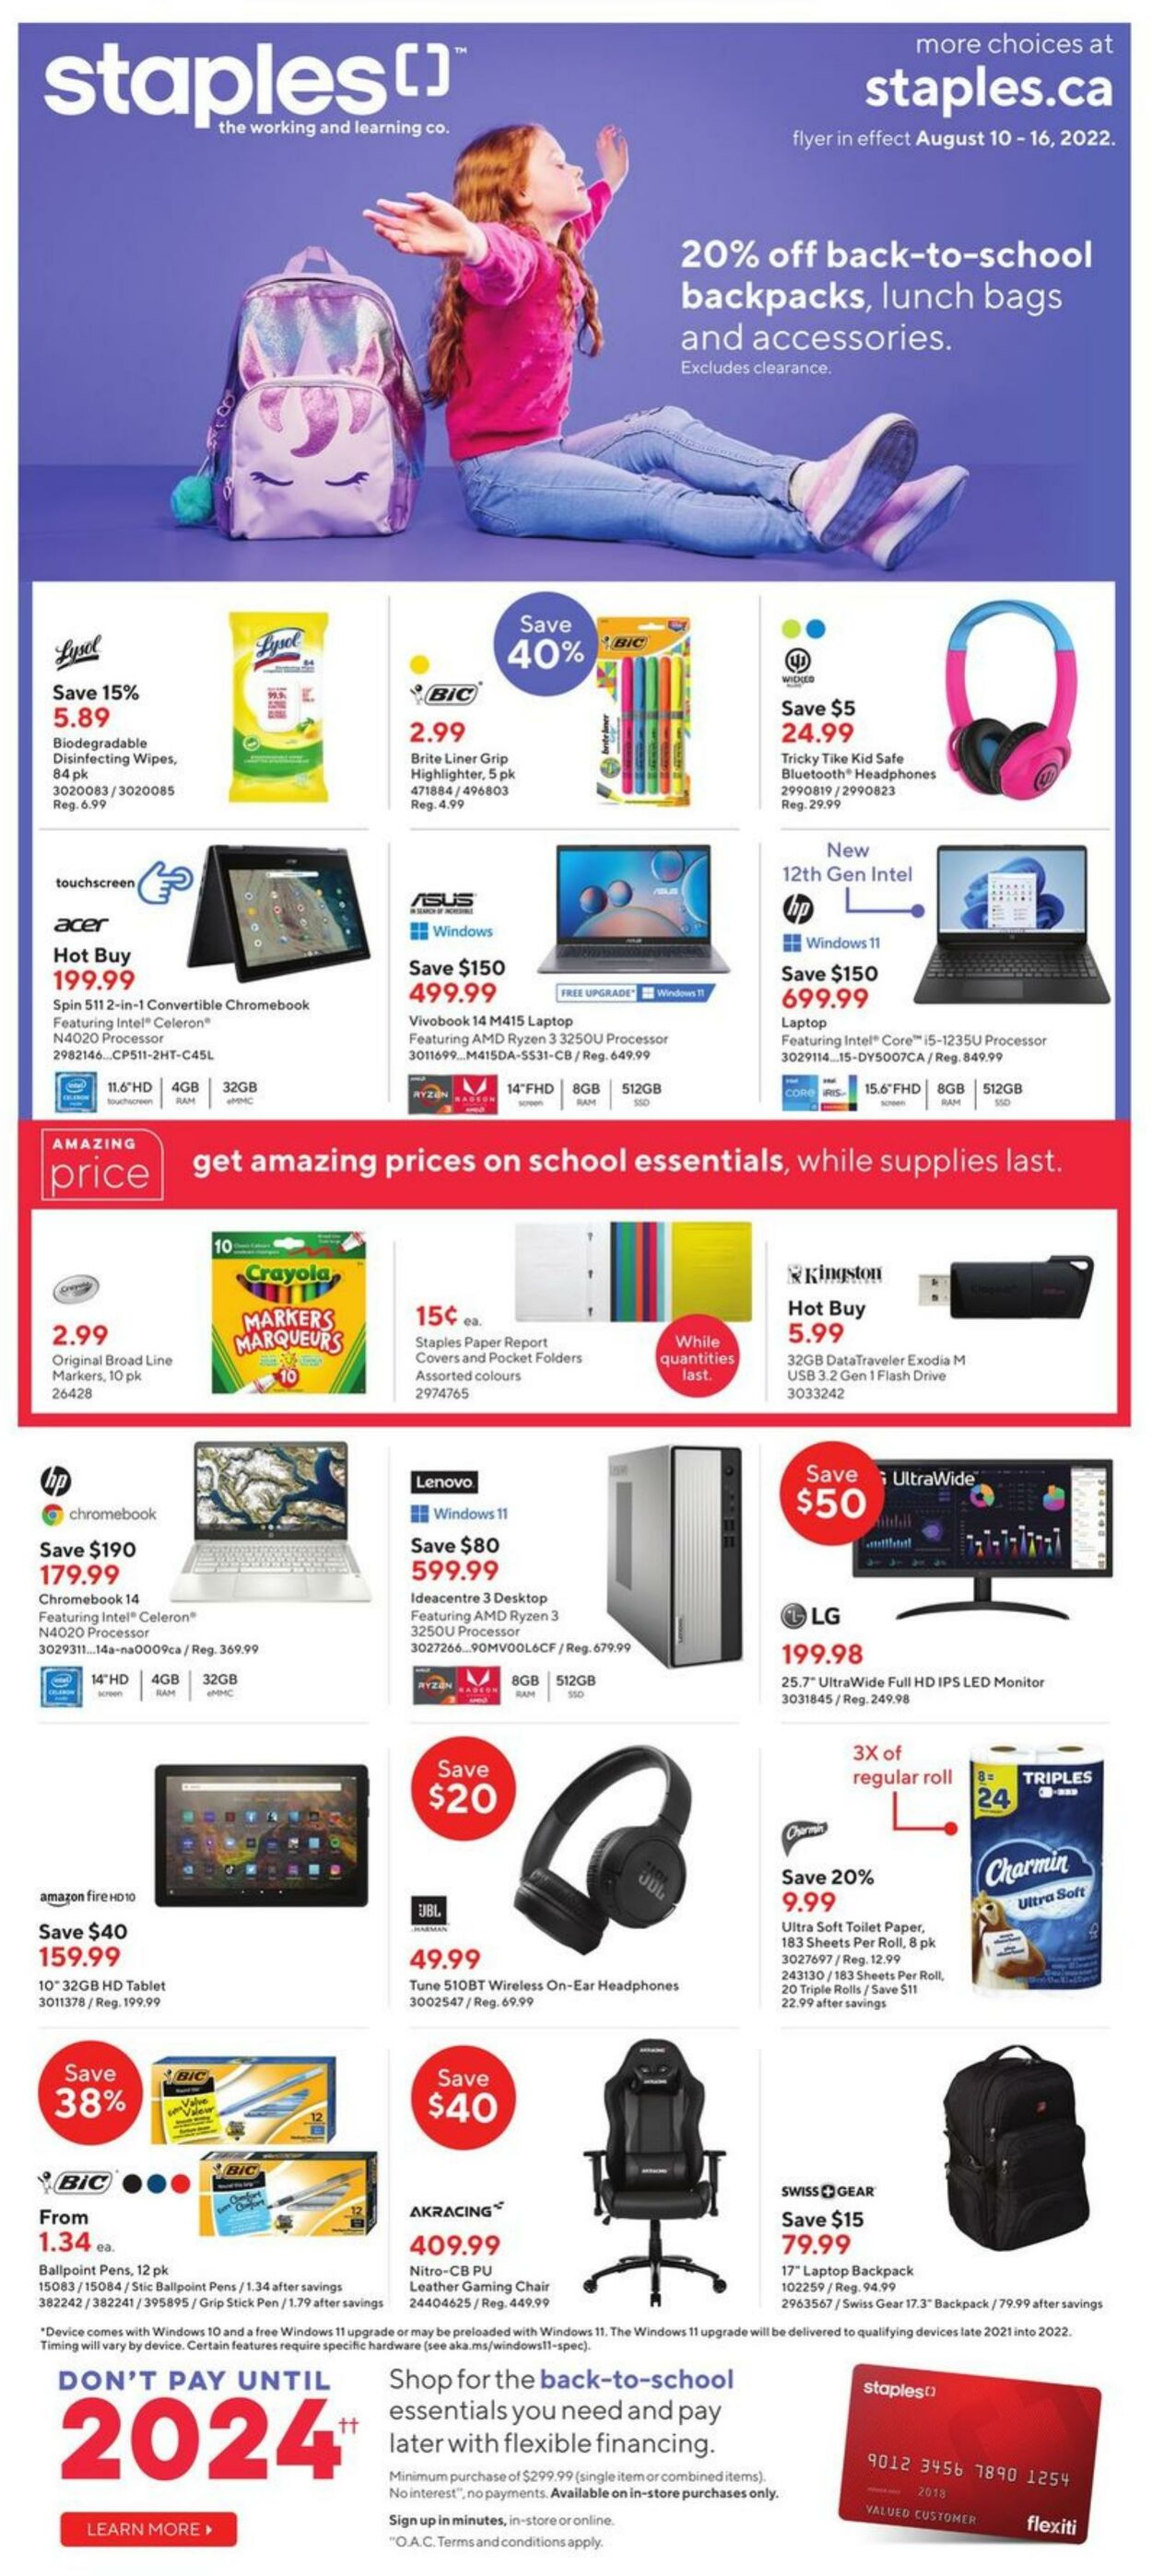 Staples Promotional flyers